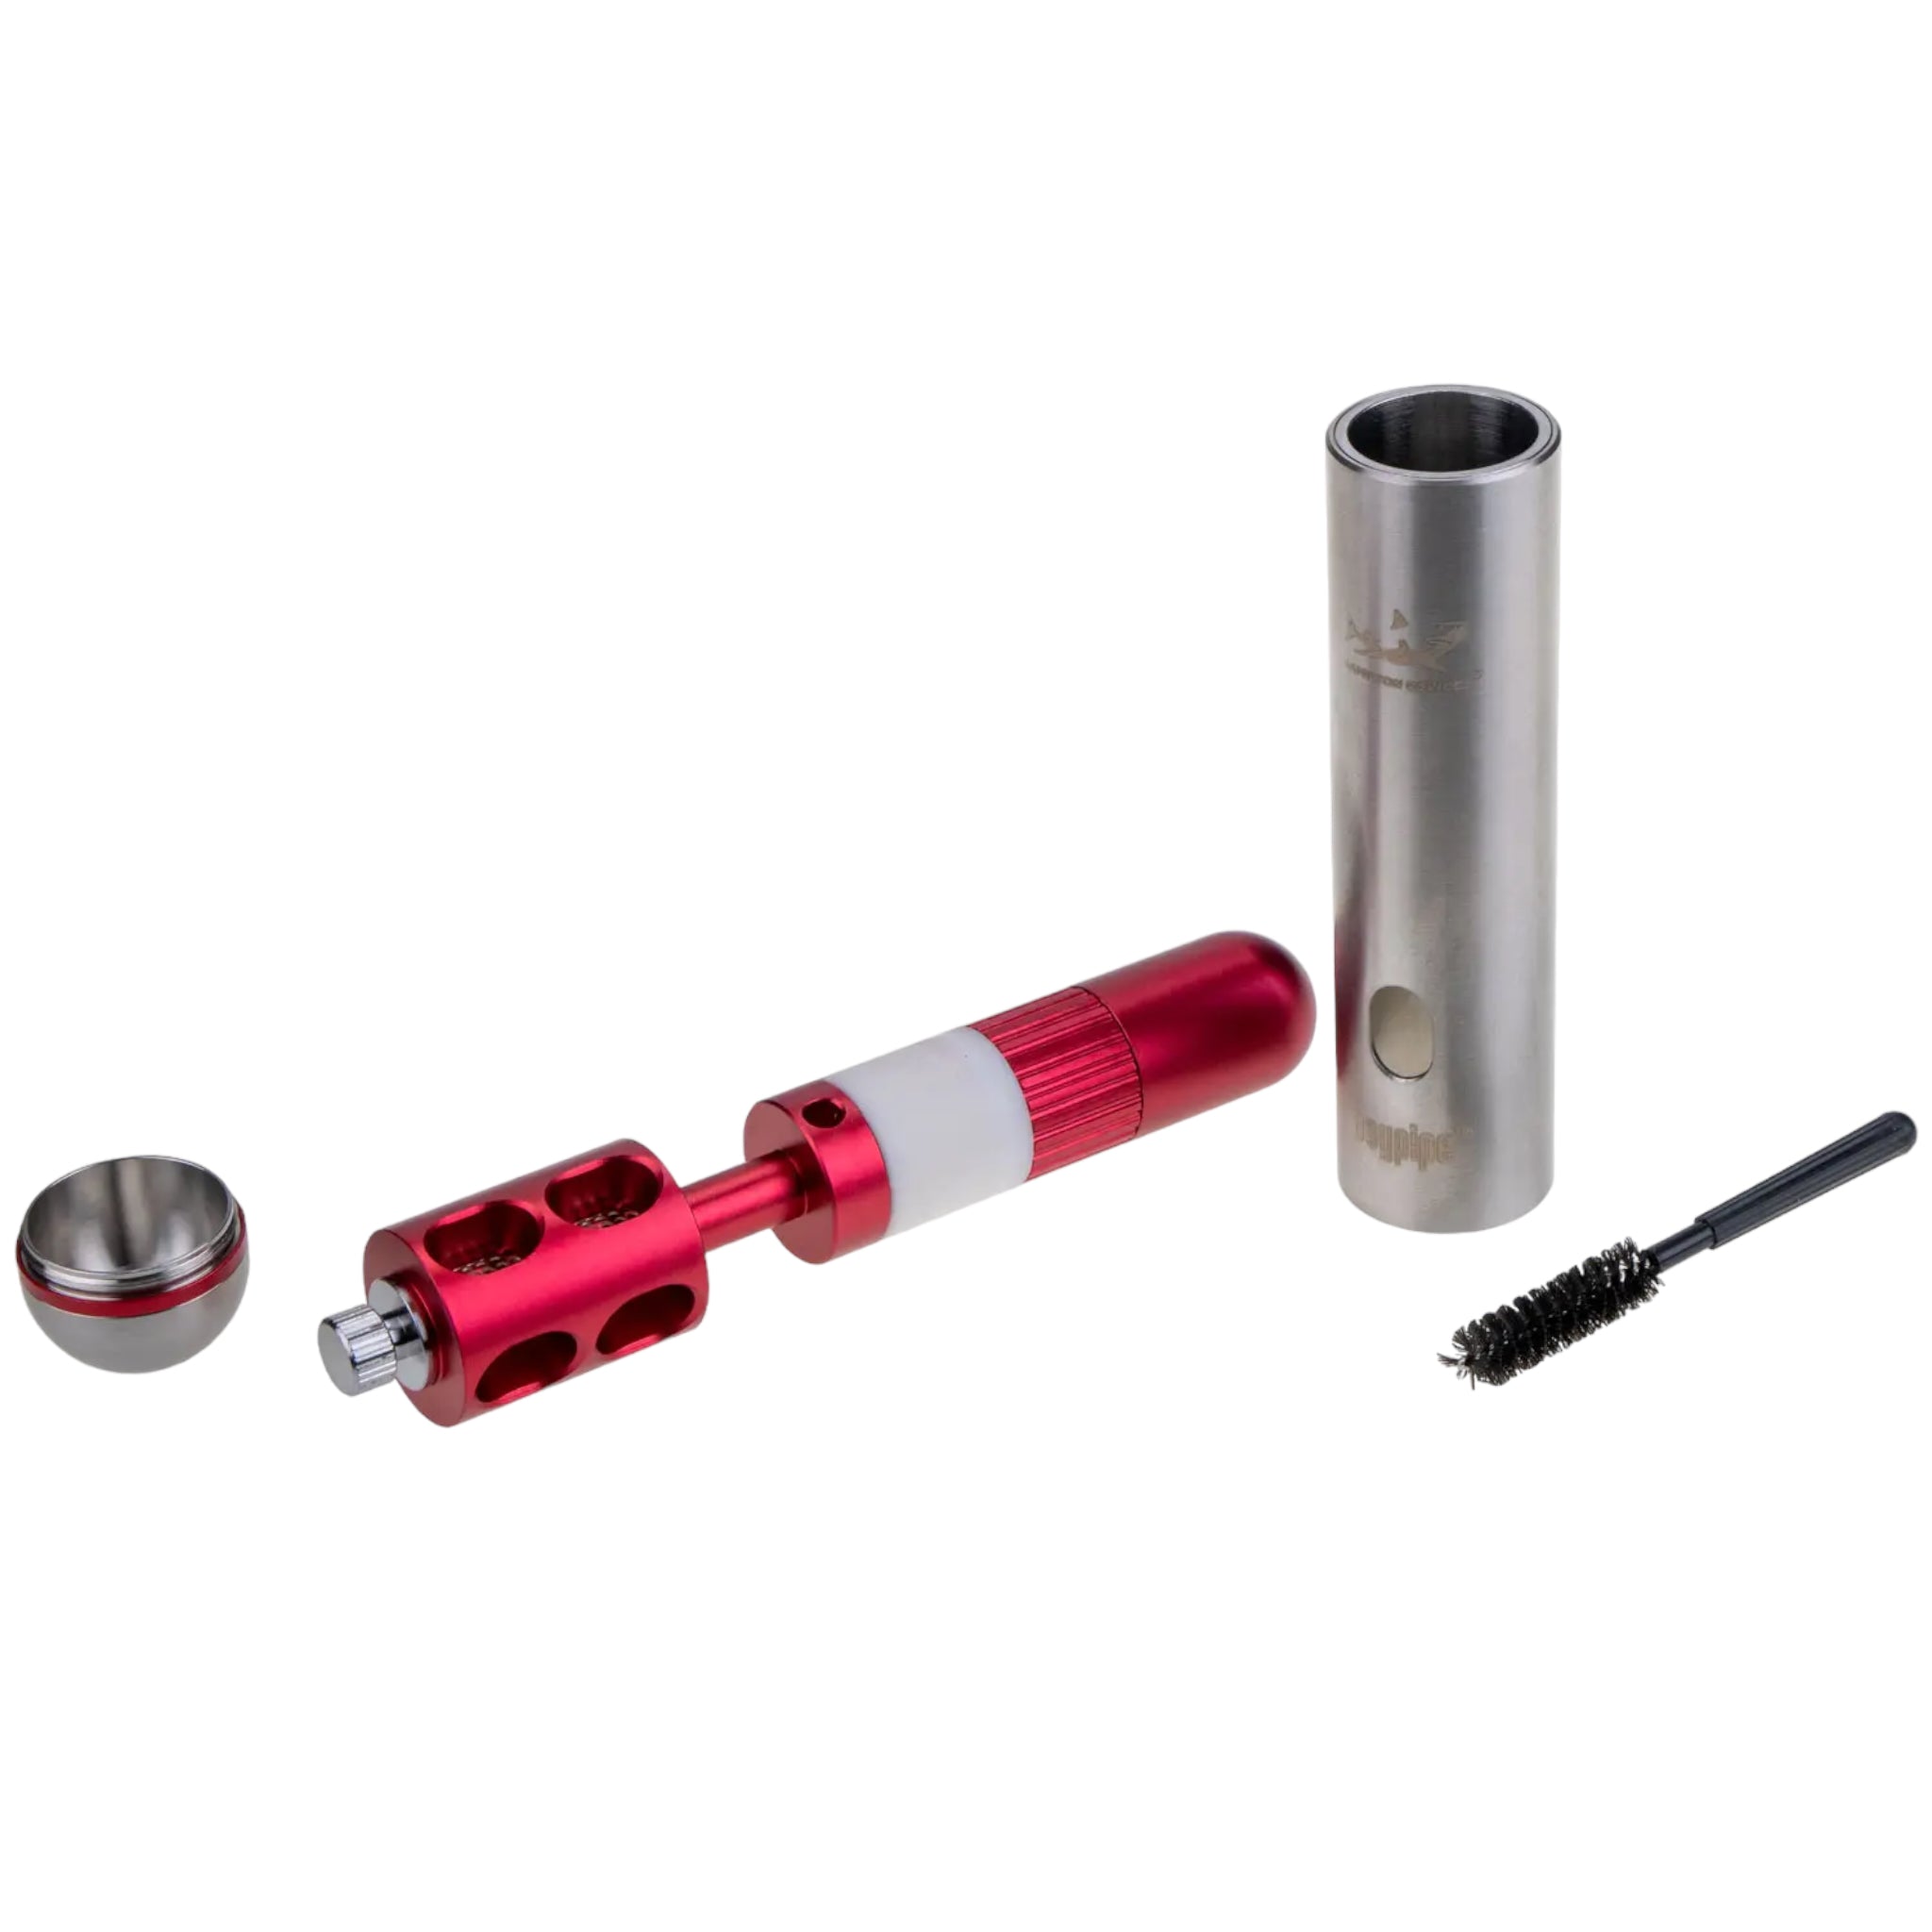 Hamilton Devices Daypipe Red